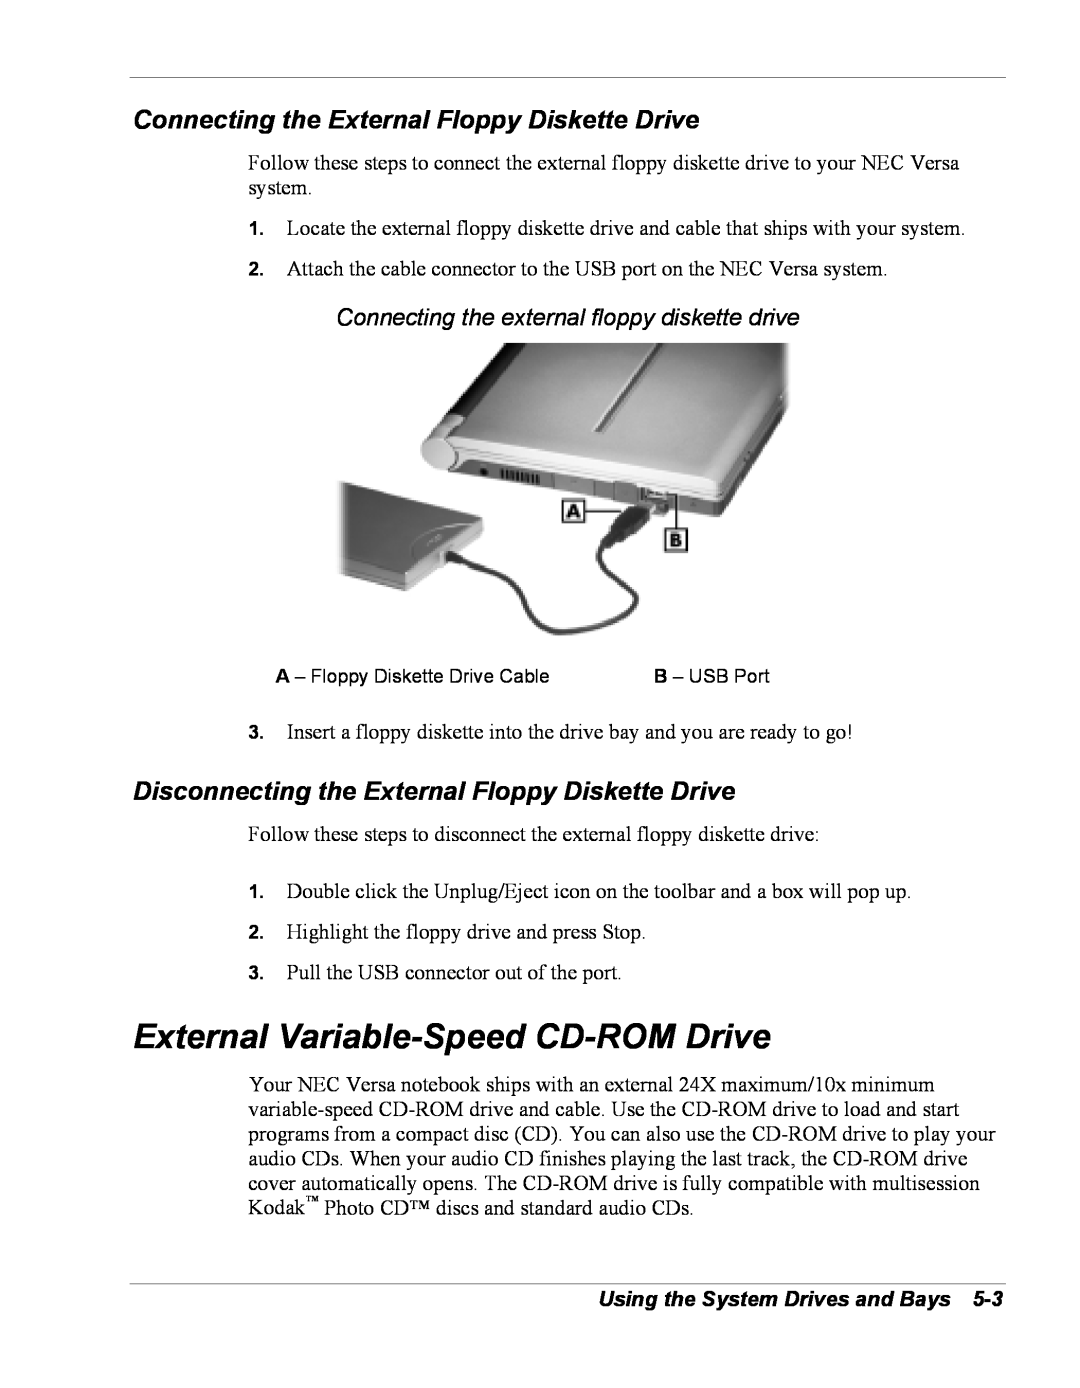 NEC Versa Series manual External Variable-Speed CD-ROM Drive, Connecting the External Floppy Diskette Drive 